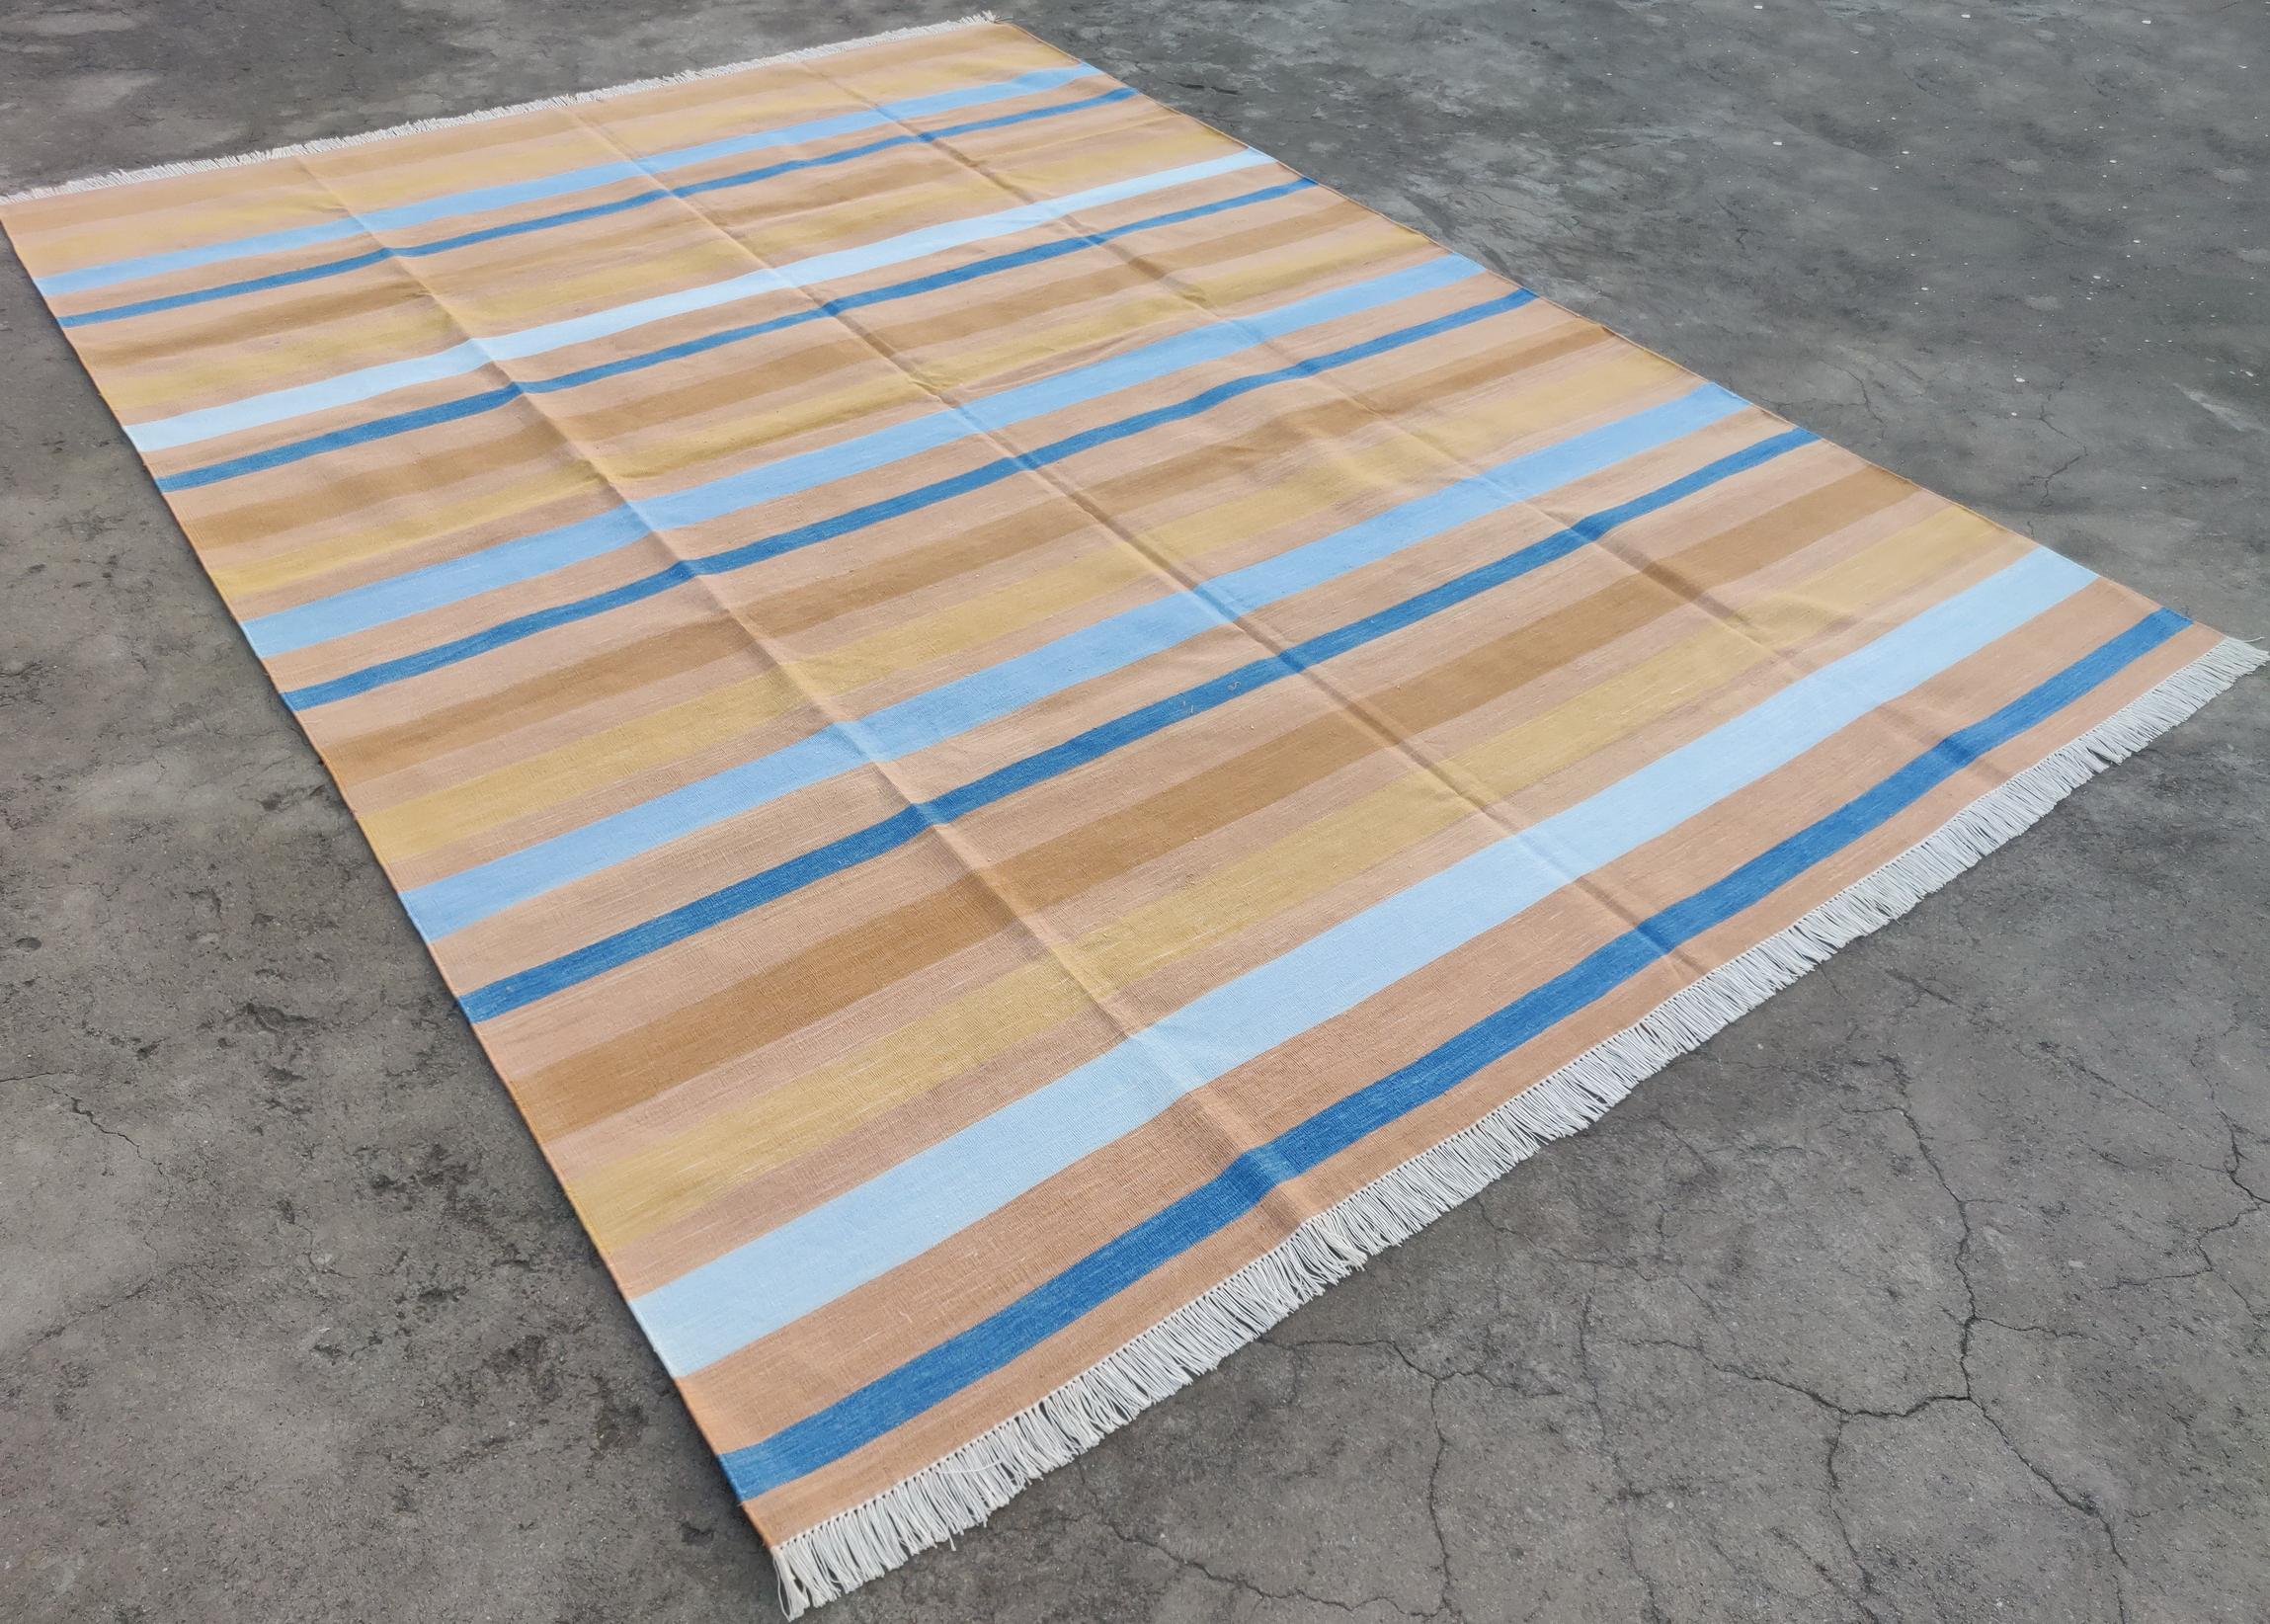 Cotton Vegetable Dyed Tan And Blue Striped Indian Dhurrie Rug-6'x9' 
These special flat-weave dhurries are hand-woven with 15 ply 100% cotton yarn. Due to the special manufacturing techniques used to create our rugs, the size and color of each piece